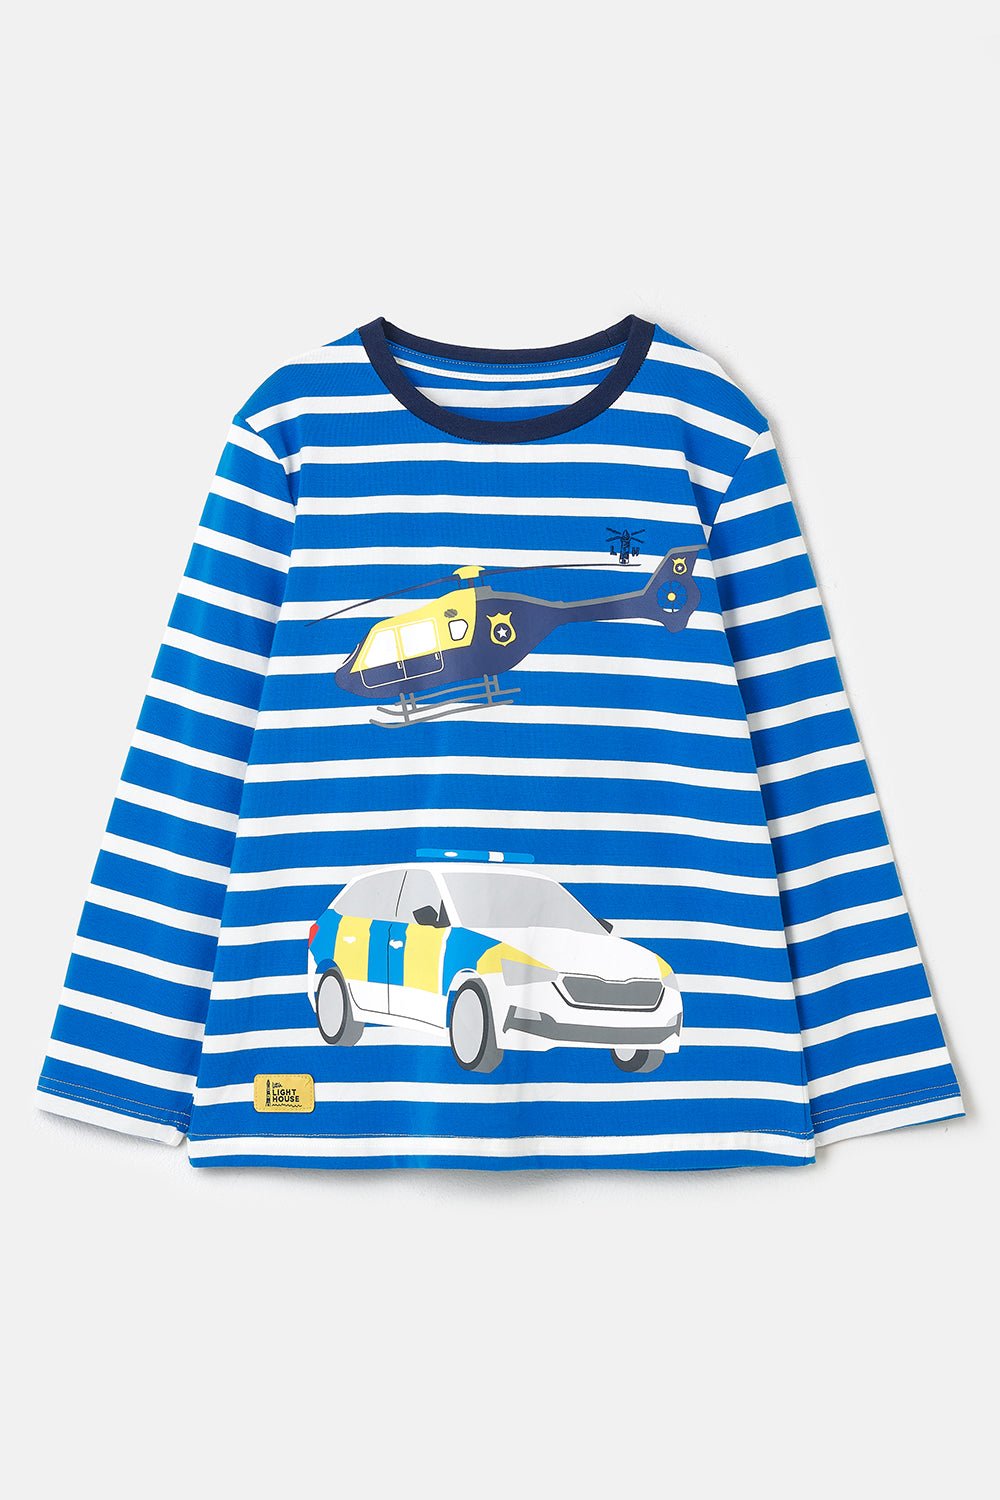 Oliver Top - Police Helicopter Print